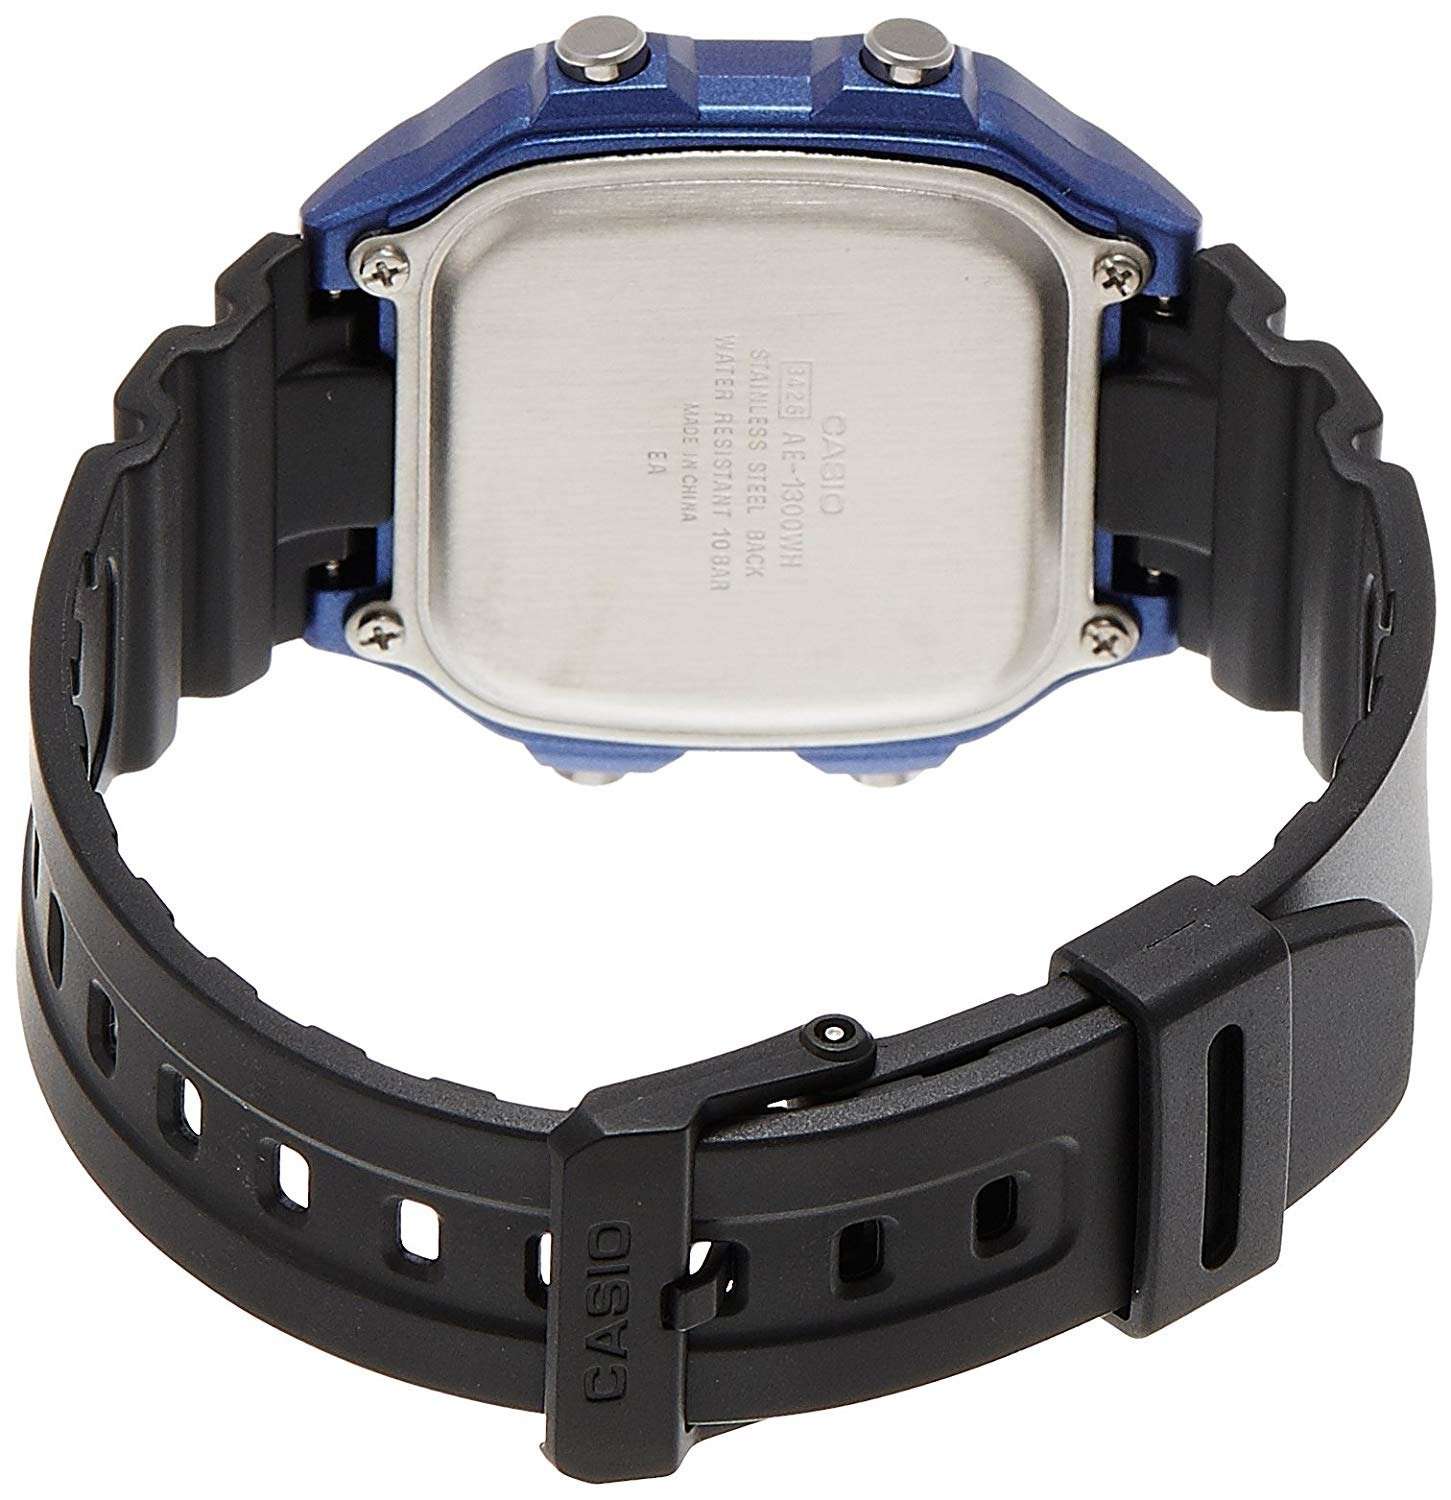 Casio AE-1300WH-2A Black Resin Strap Watch for Men-Watch Portal Philippines